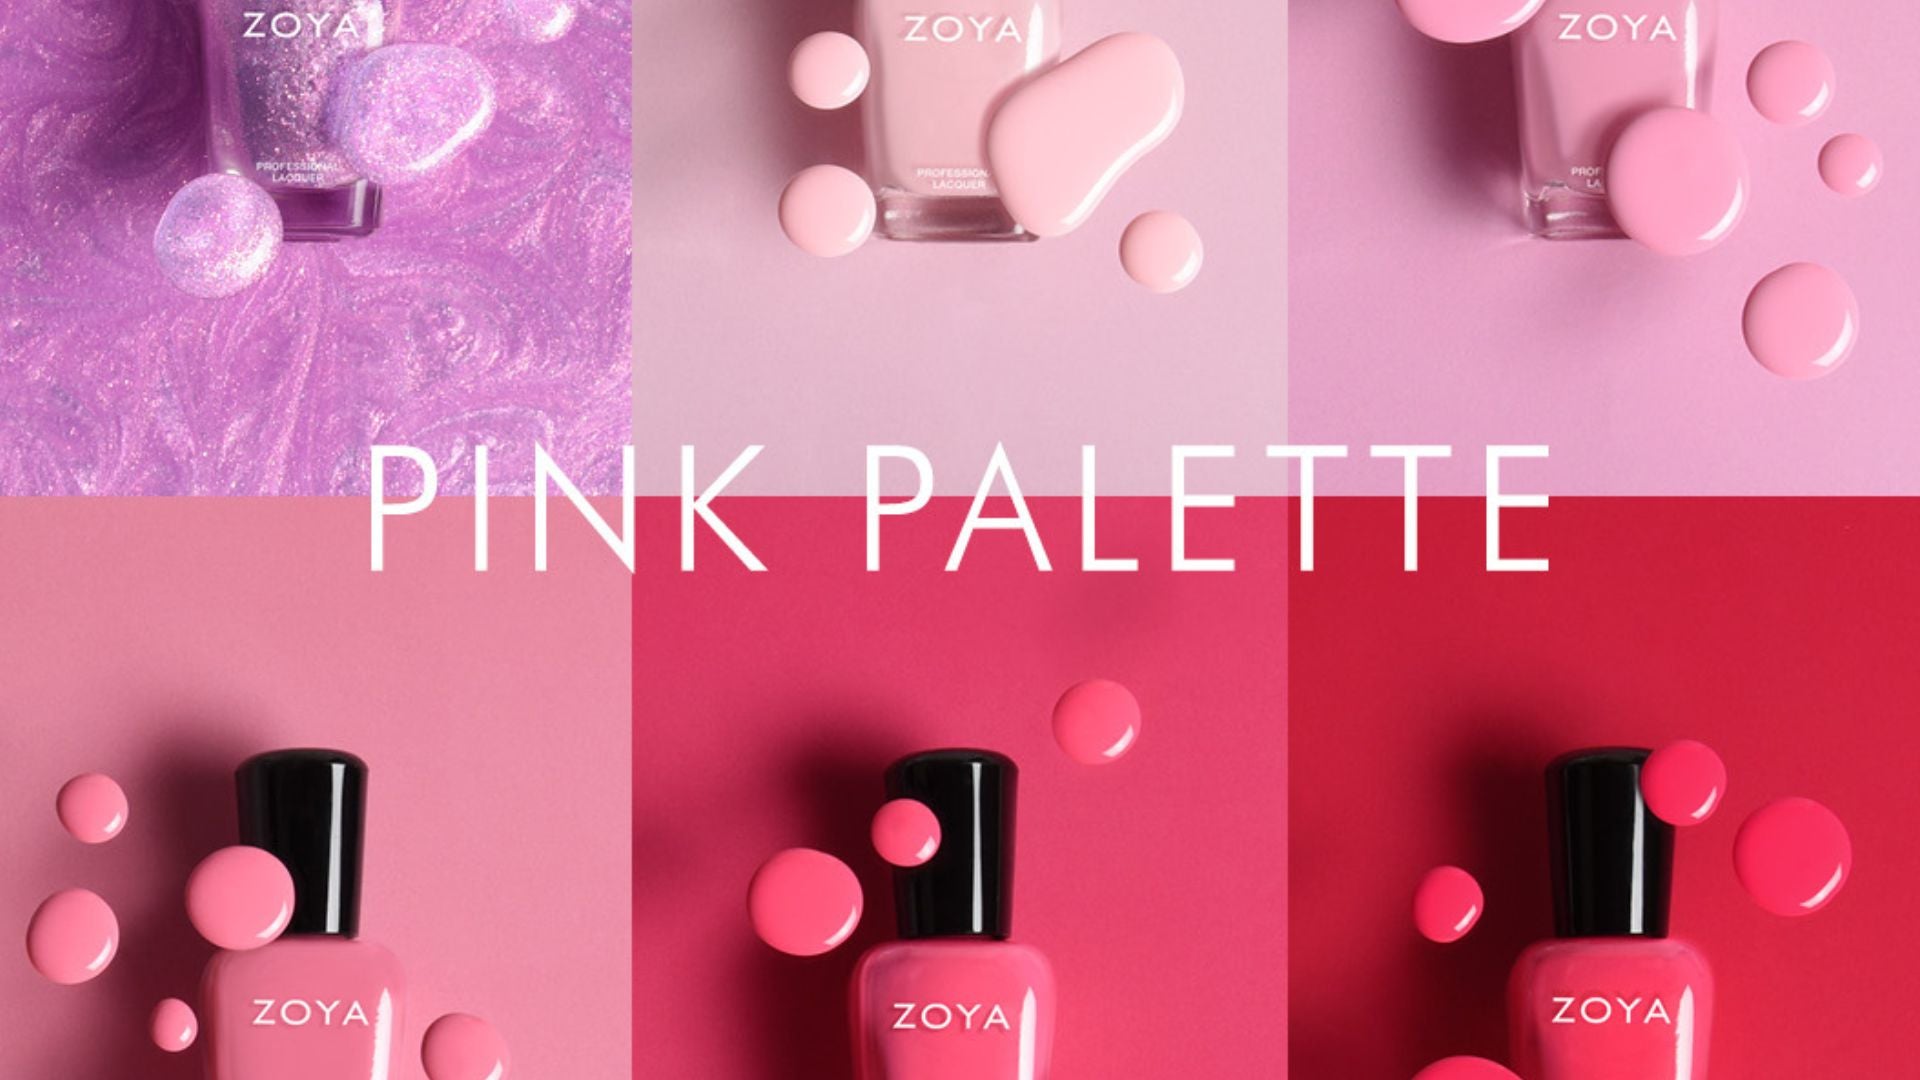 review, photos, ingredients, trends, 2022, 2023, nail polish, zoya, pink palette, summer 2022, angel, joanie, maddy, shannon, kay, gigi, best summer nail polish, nail polish trends